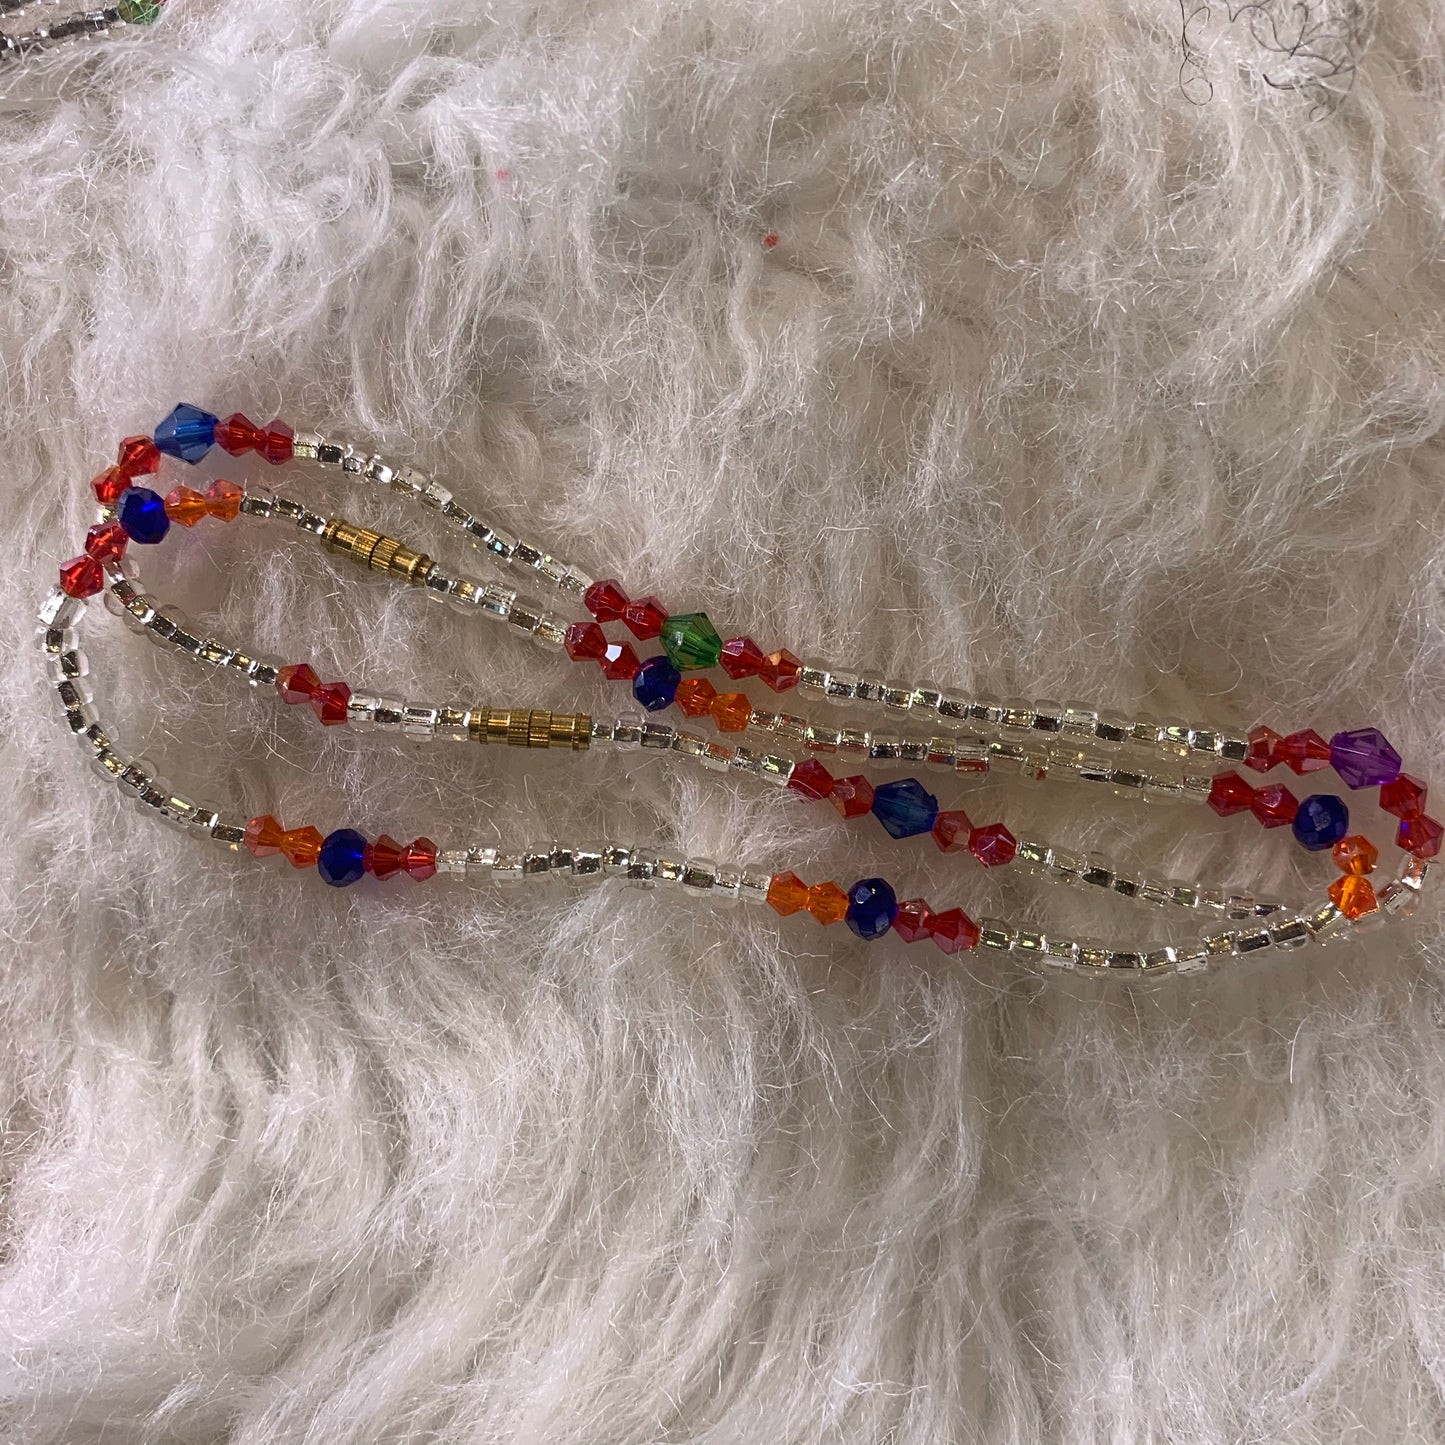 9 Inches Silver Glass Beads With Red, Orange, blue And Green Pebble Bar Removable Screws Anklet